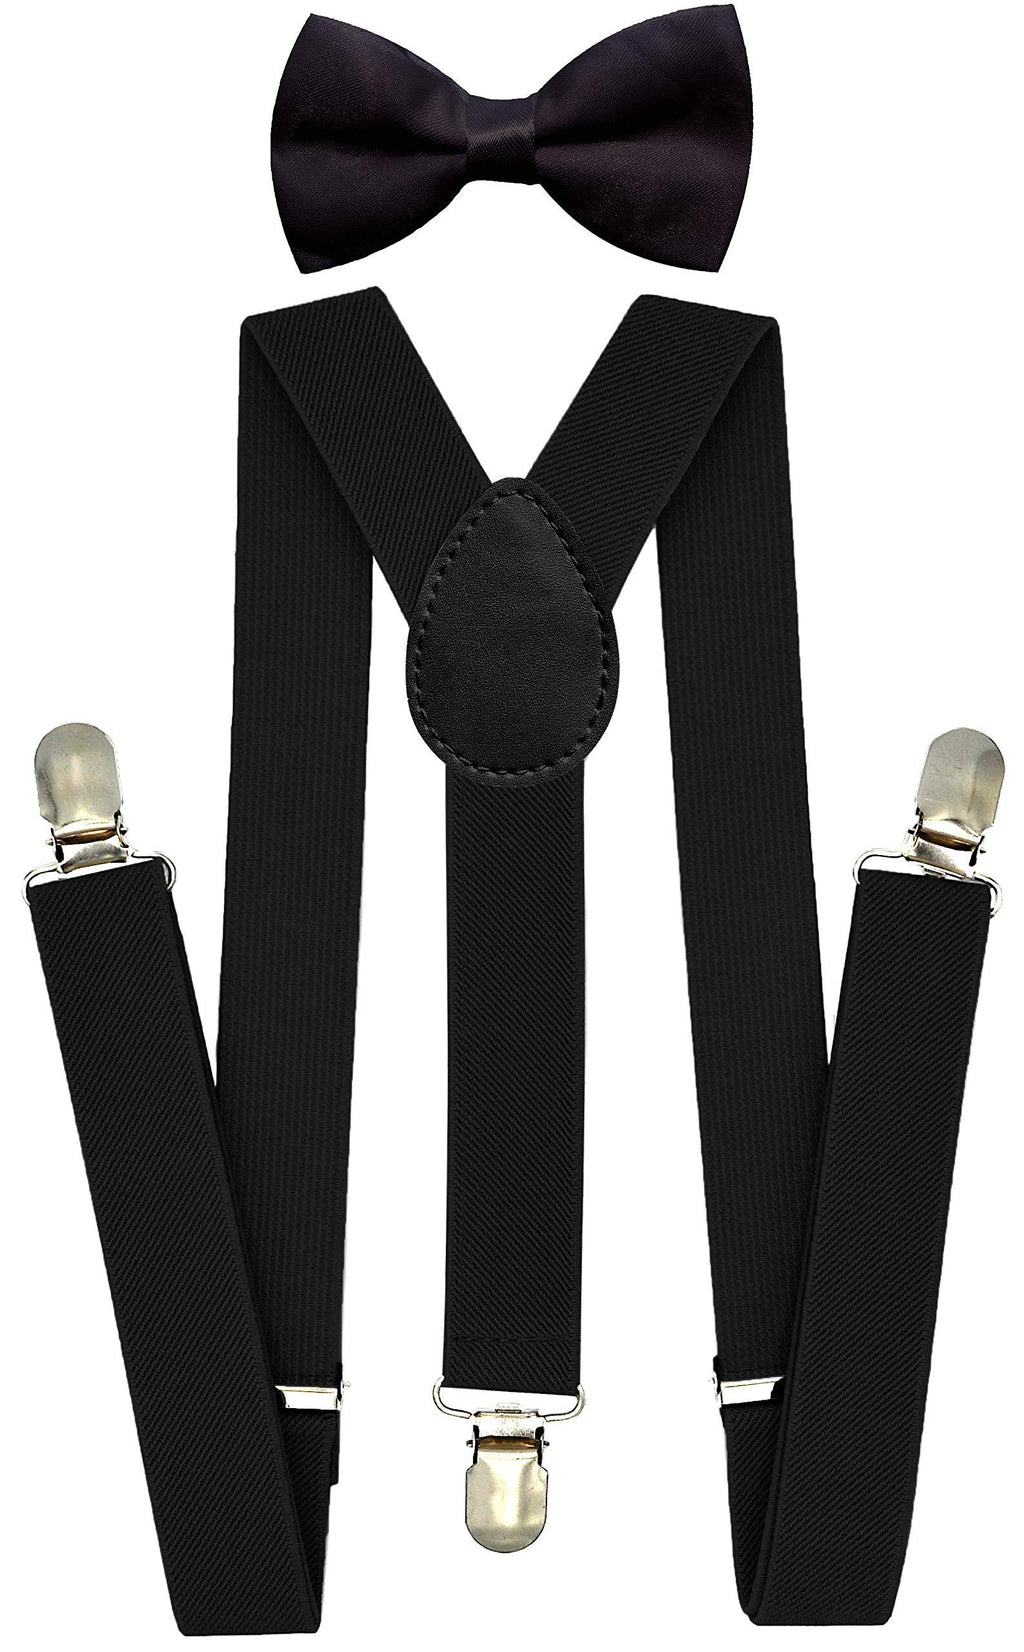 [Australia] - Suspenders for Boys - Kids Adjustable Size Elastic 1 inch Wide Y Shape Strong Clips - 6 months Toddler to 5 feet Tall A Black Set 